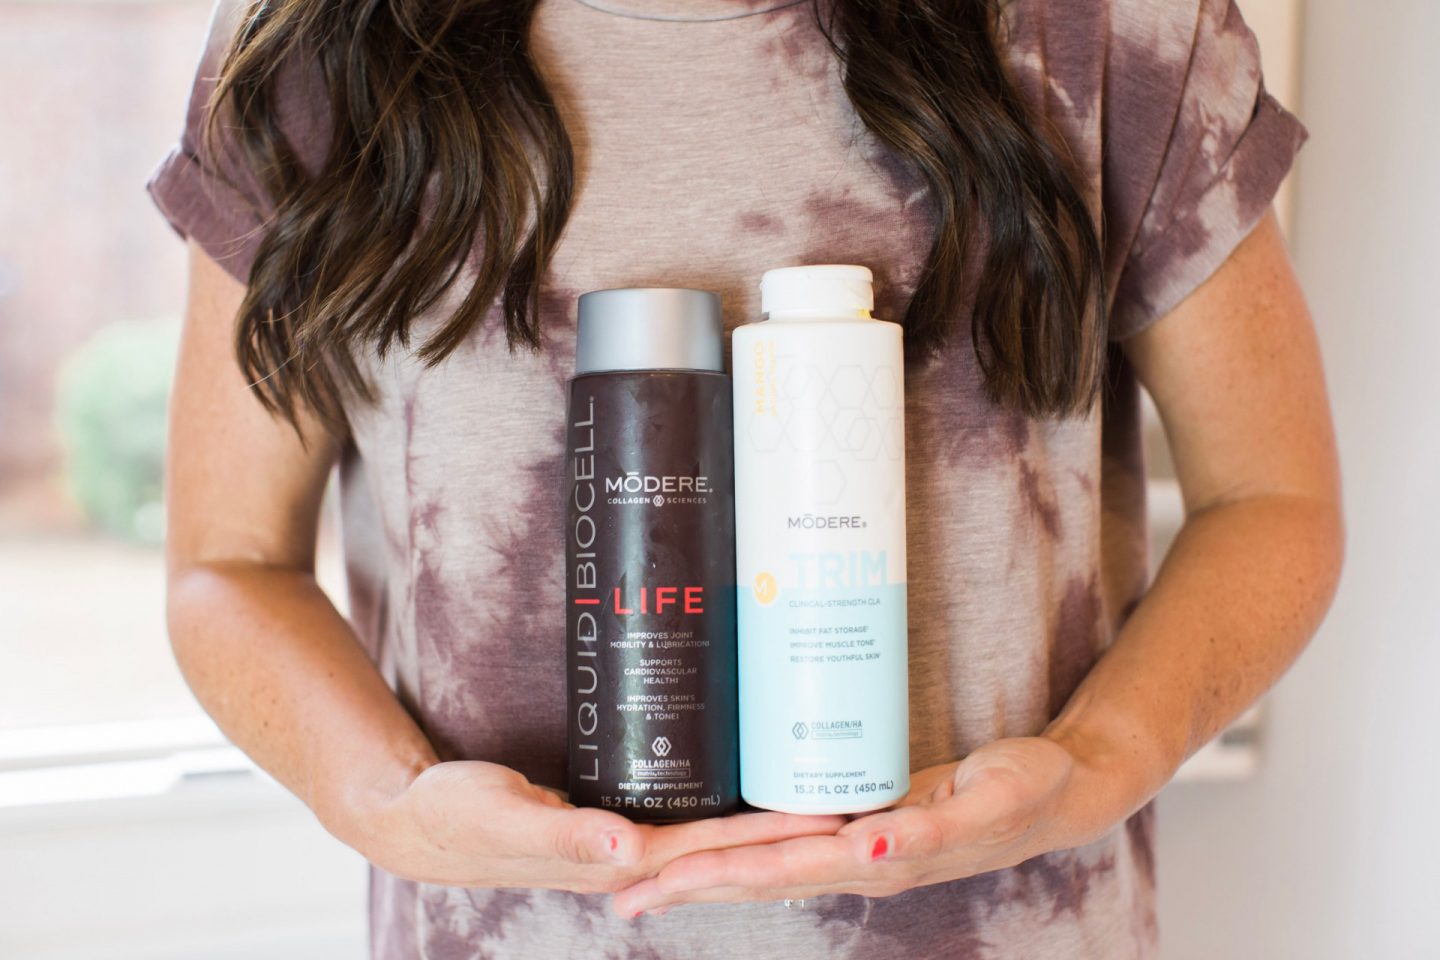 Alabama life + fitness blogger, My Life Well Loved, shares about Modere liquid collagen, TRIM, and the amazing benefits! Click here to read!